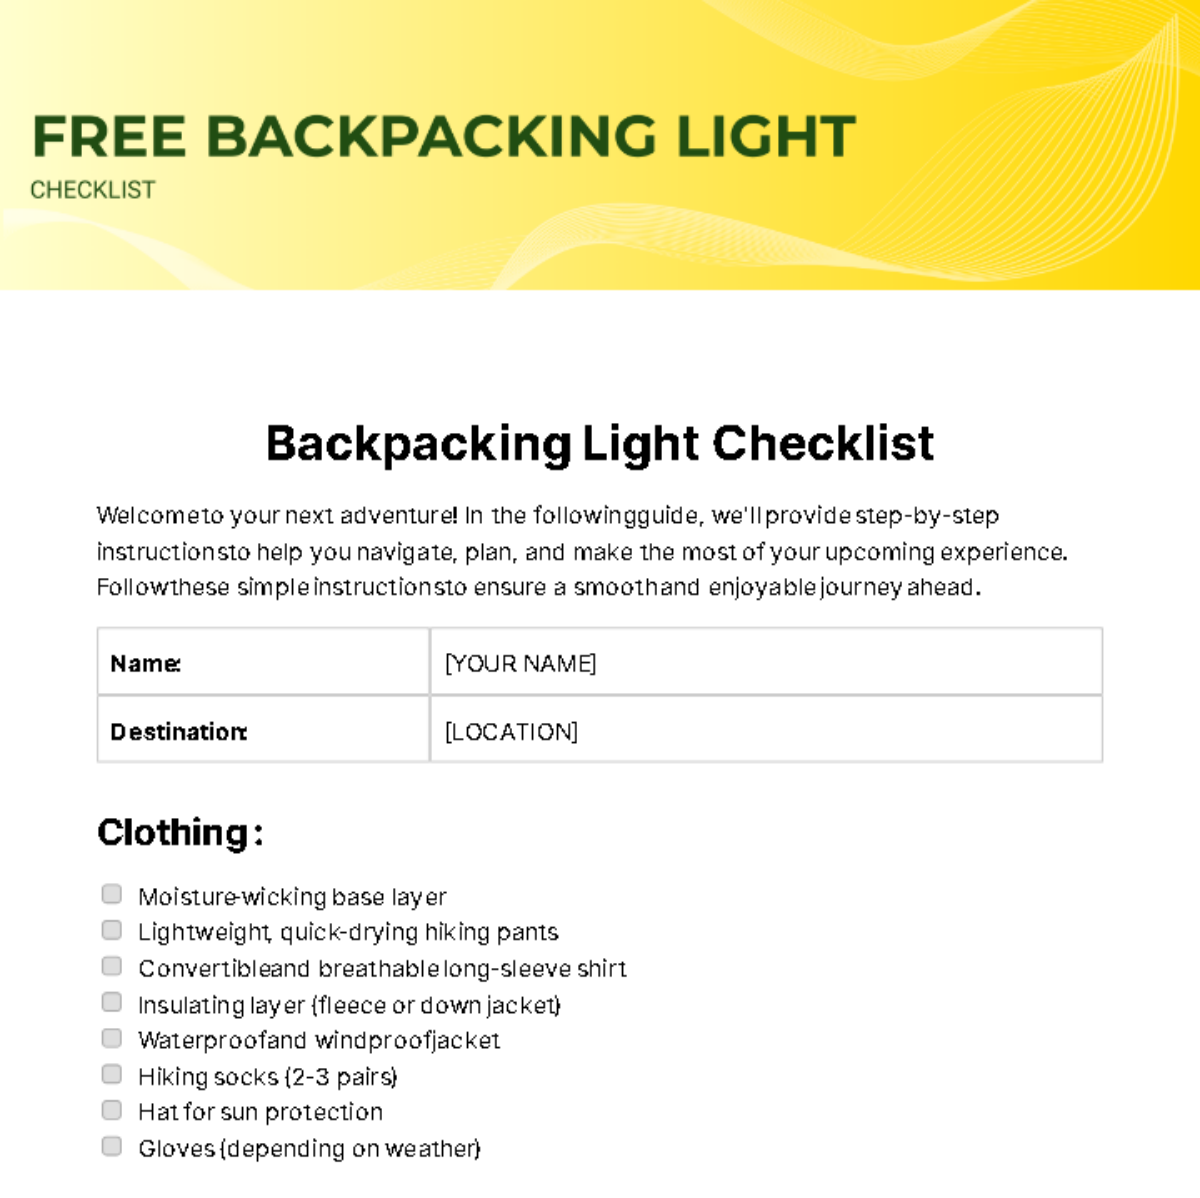 Free Backpacking Light Checklist Template